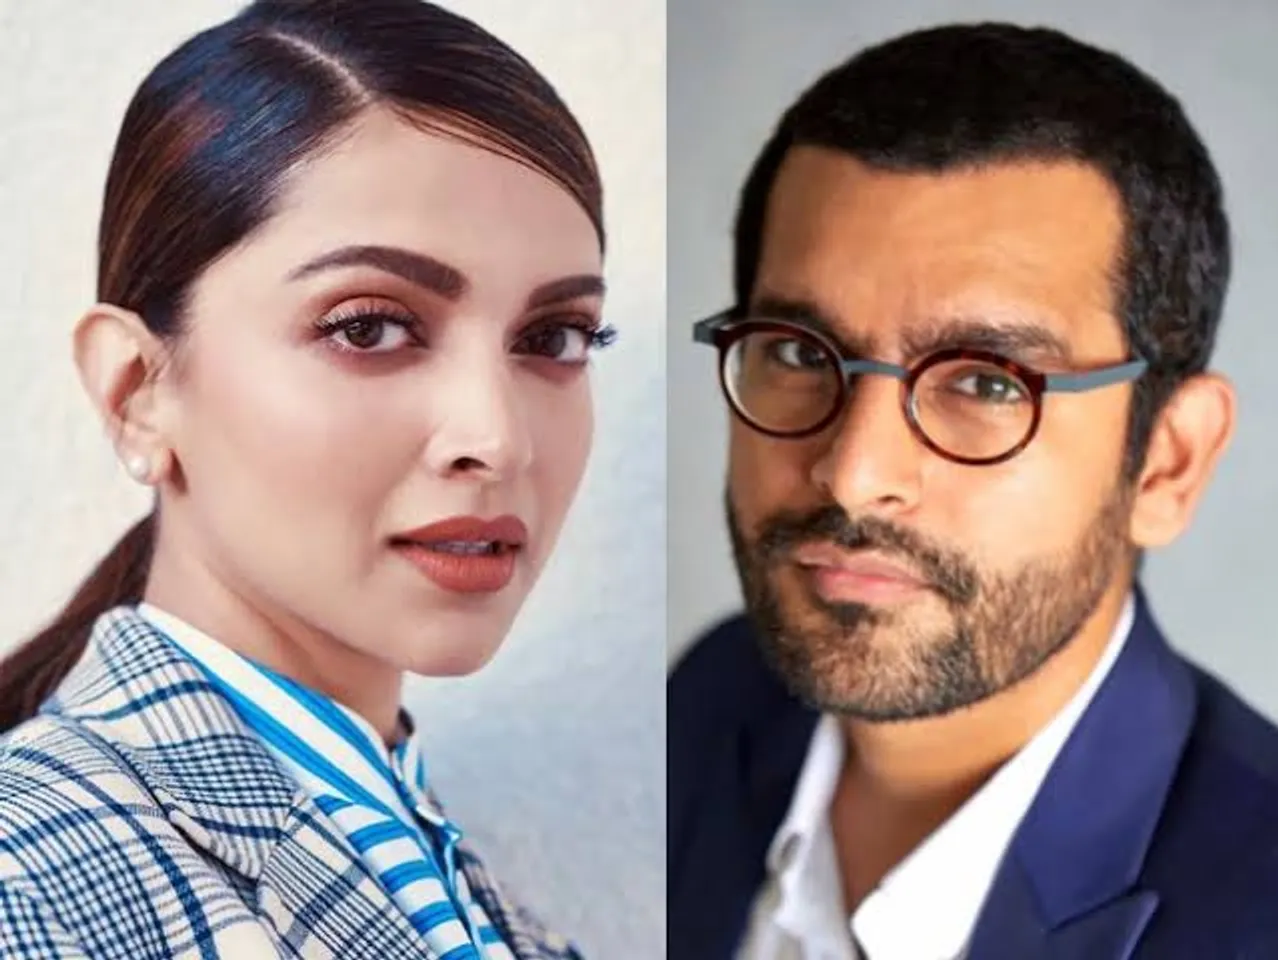 Did you know? Deepika Padukone prepped for Shakun Batra's next with her special playlist!